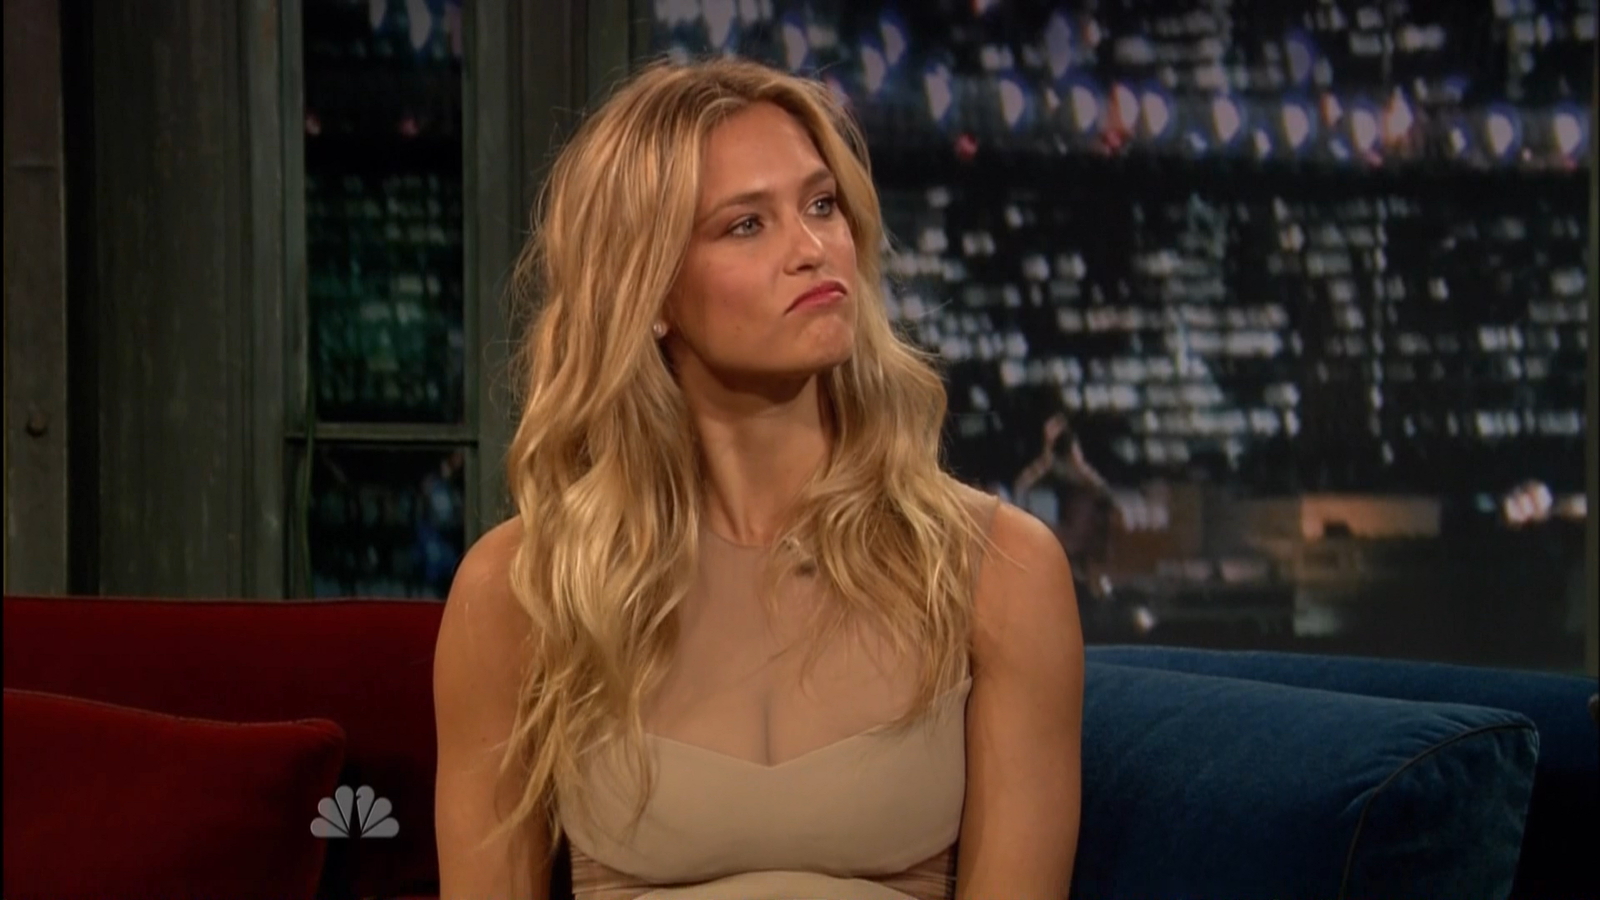 Bar Refaeli showing cleavage at Late Night with Jimmy Fallon